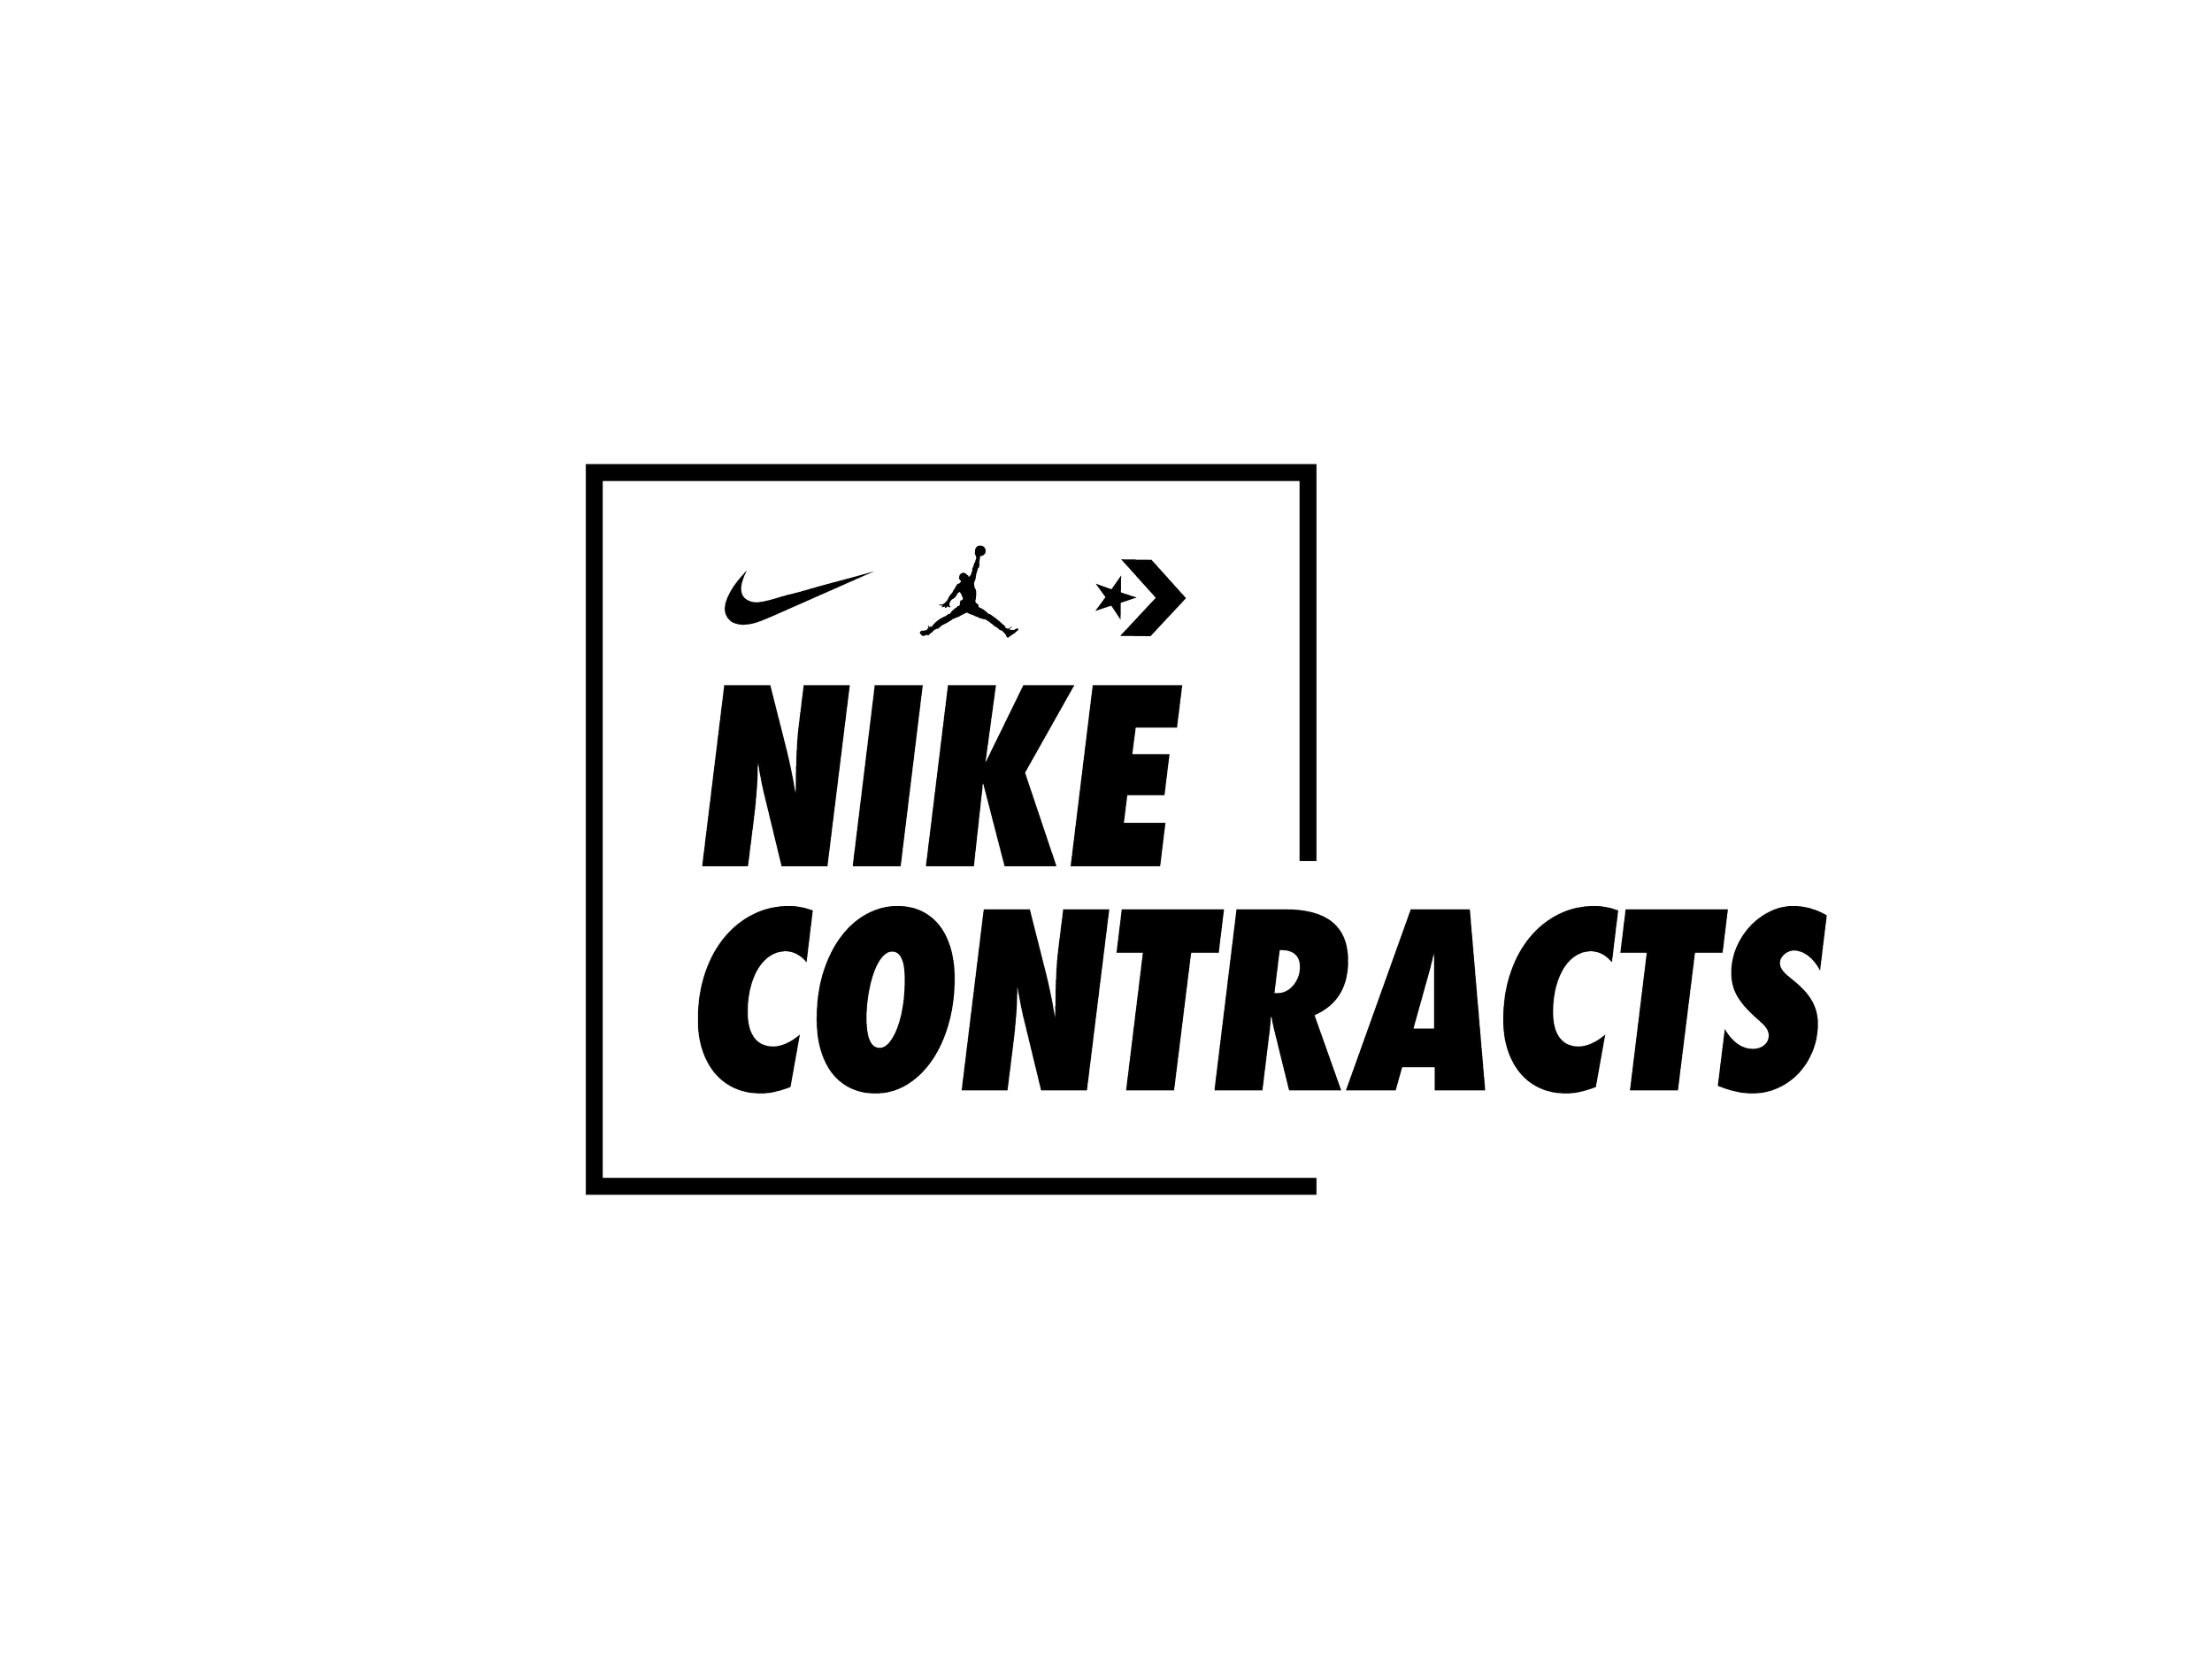 NIKEContracts_WordMark_r1-17.png